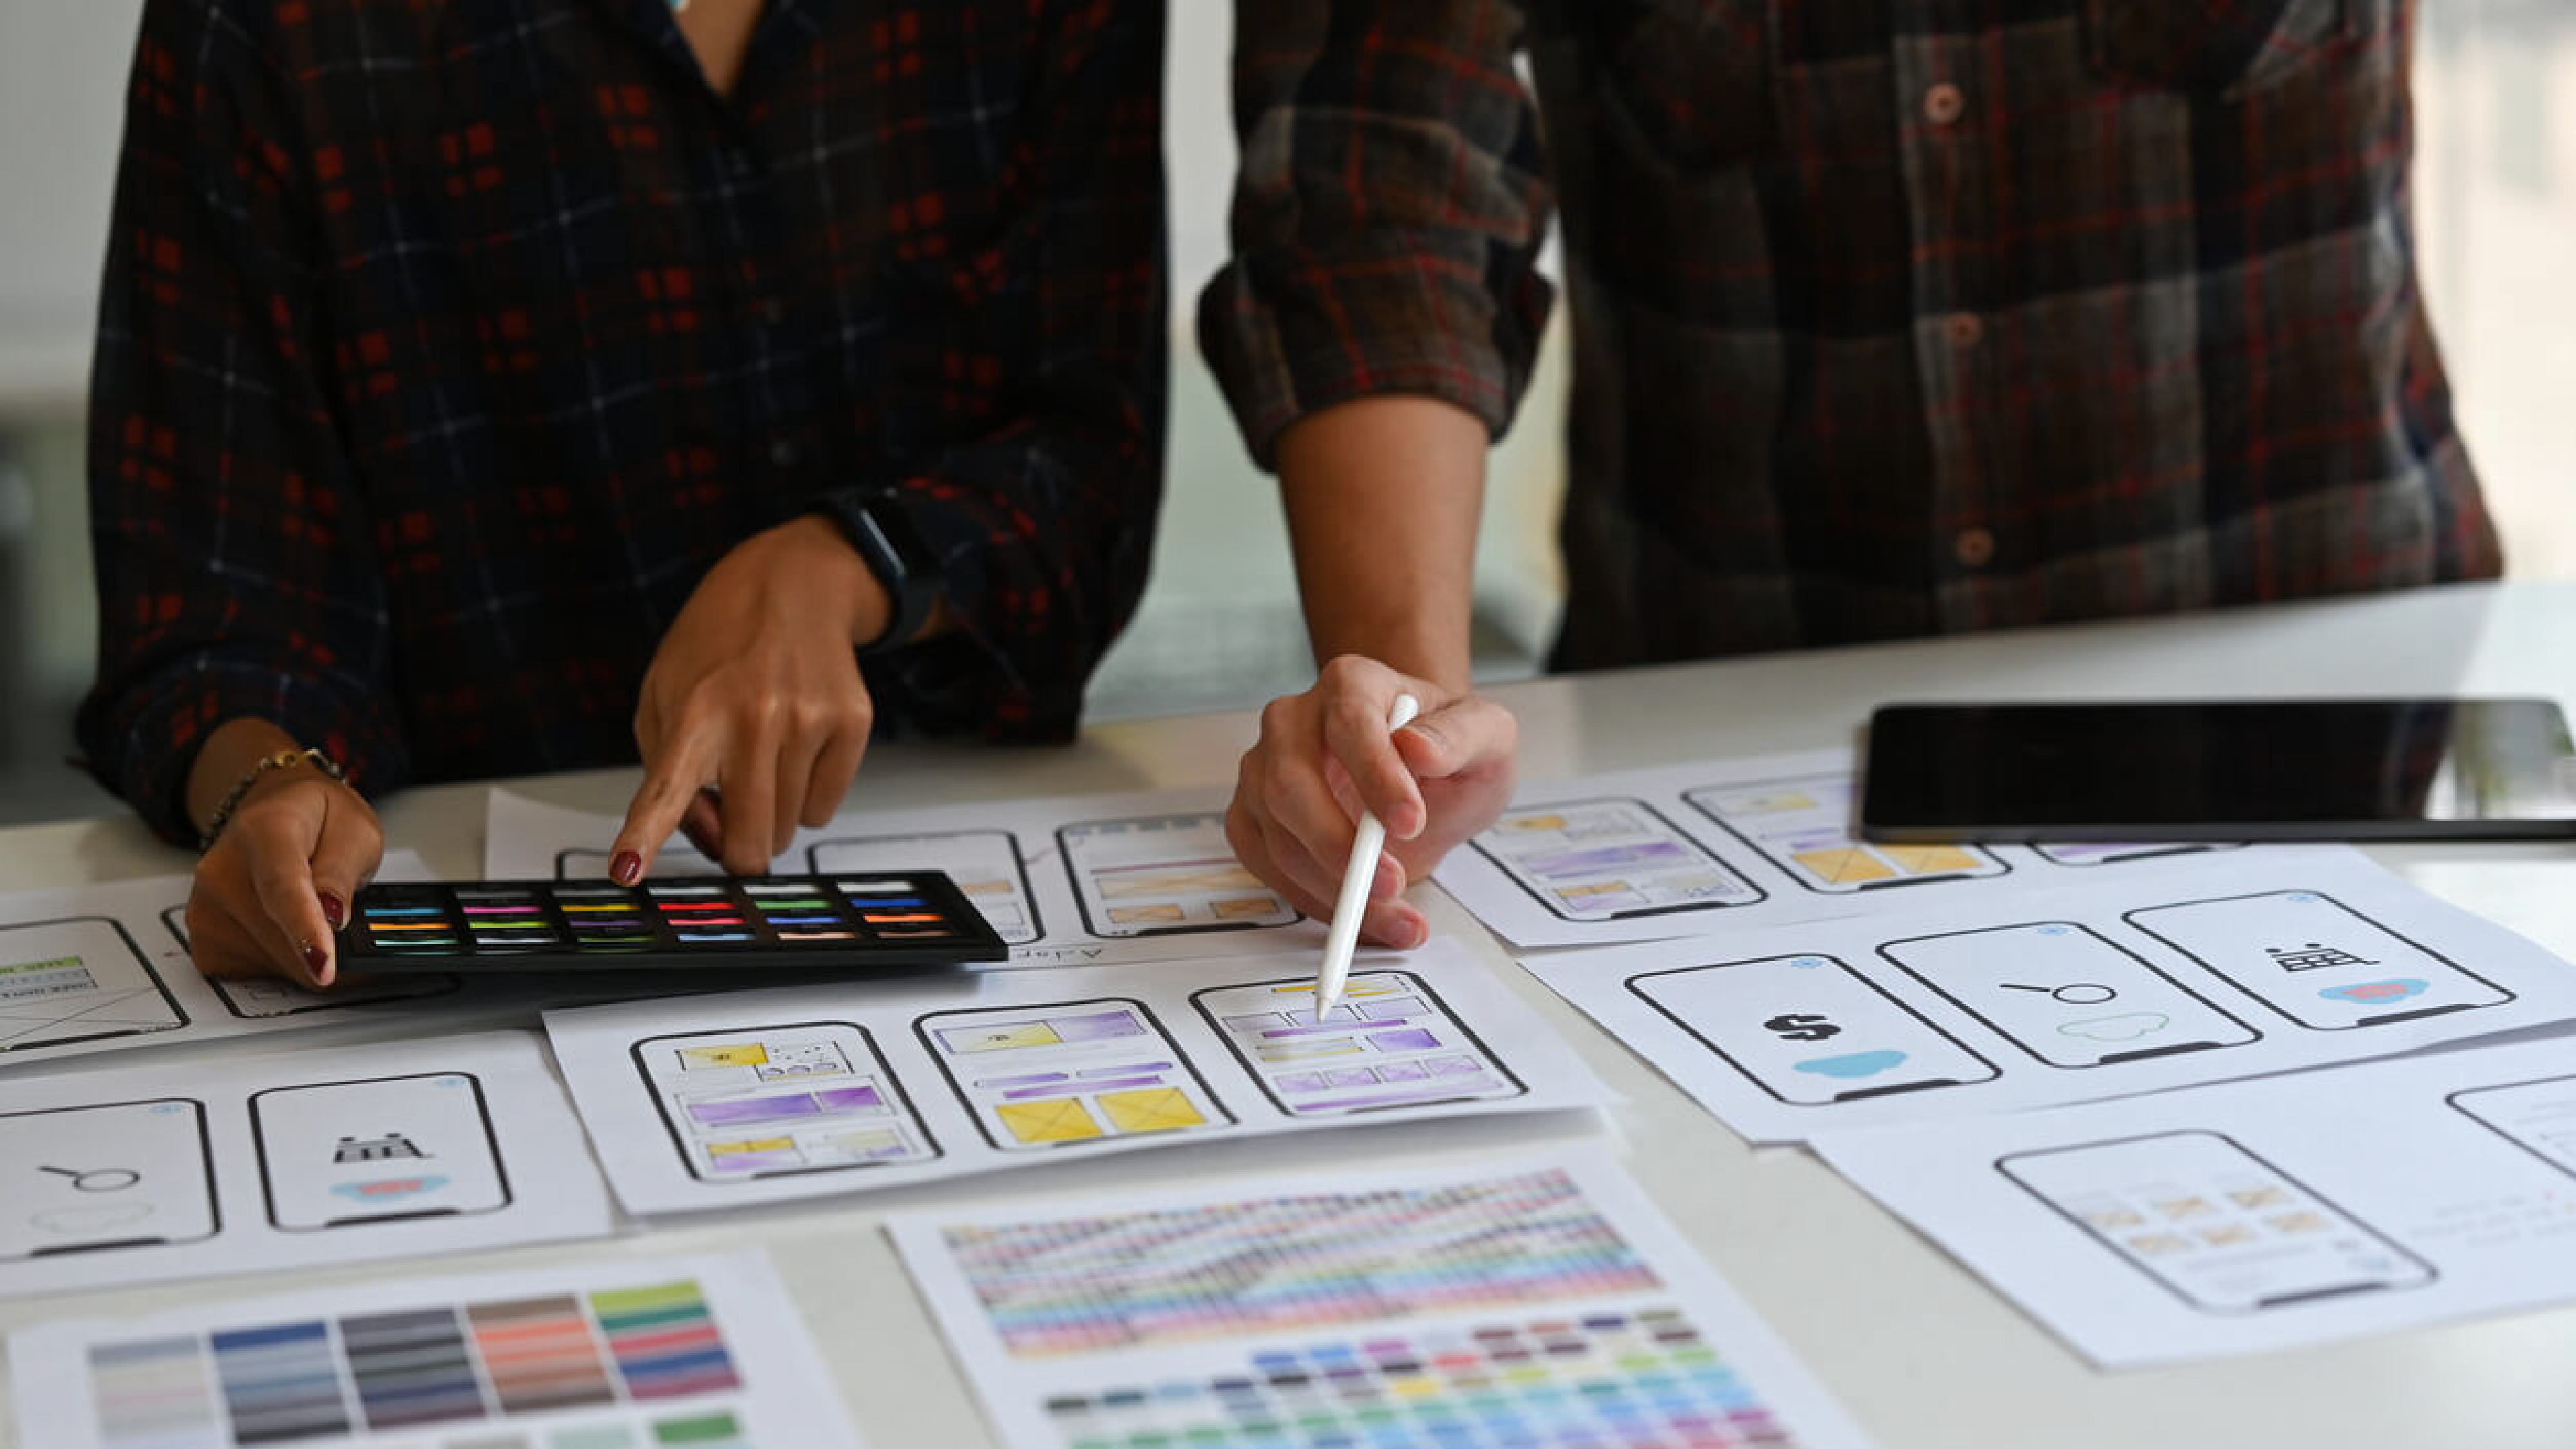 Two team members pointing to colors on sketches, deciding color palettes for an app or website.